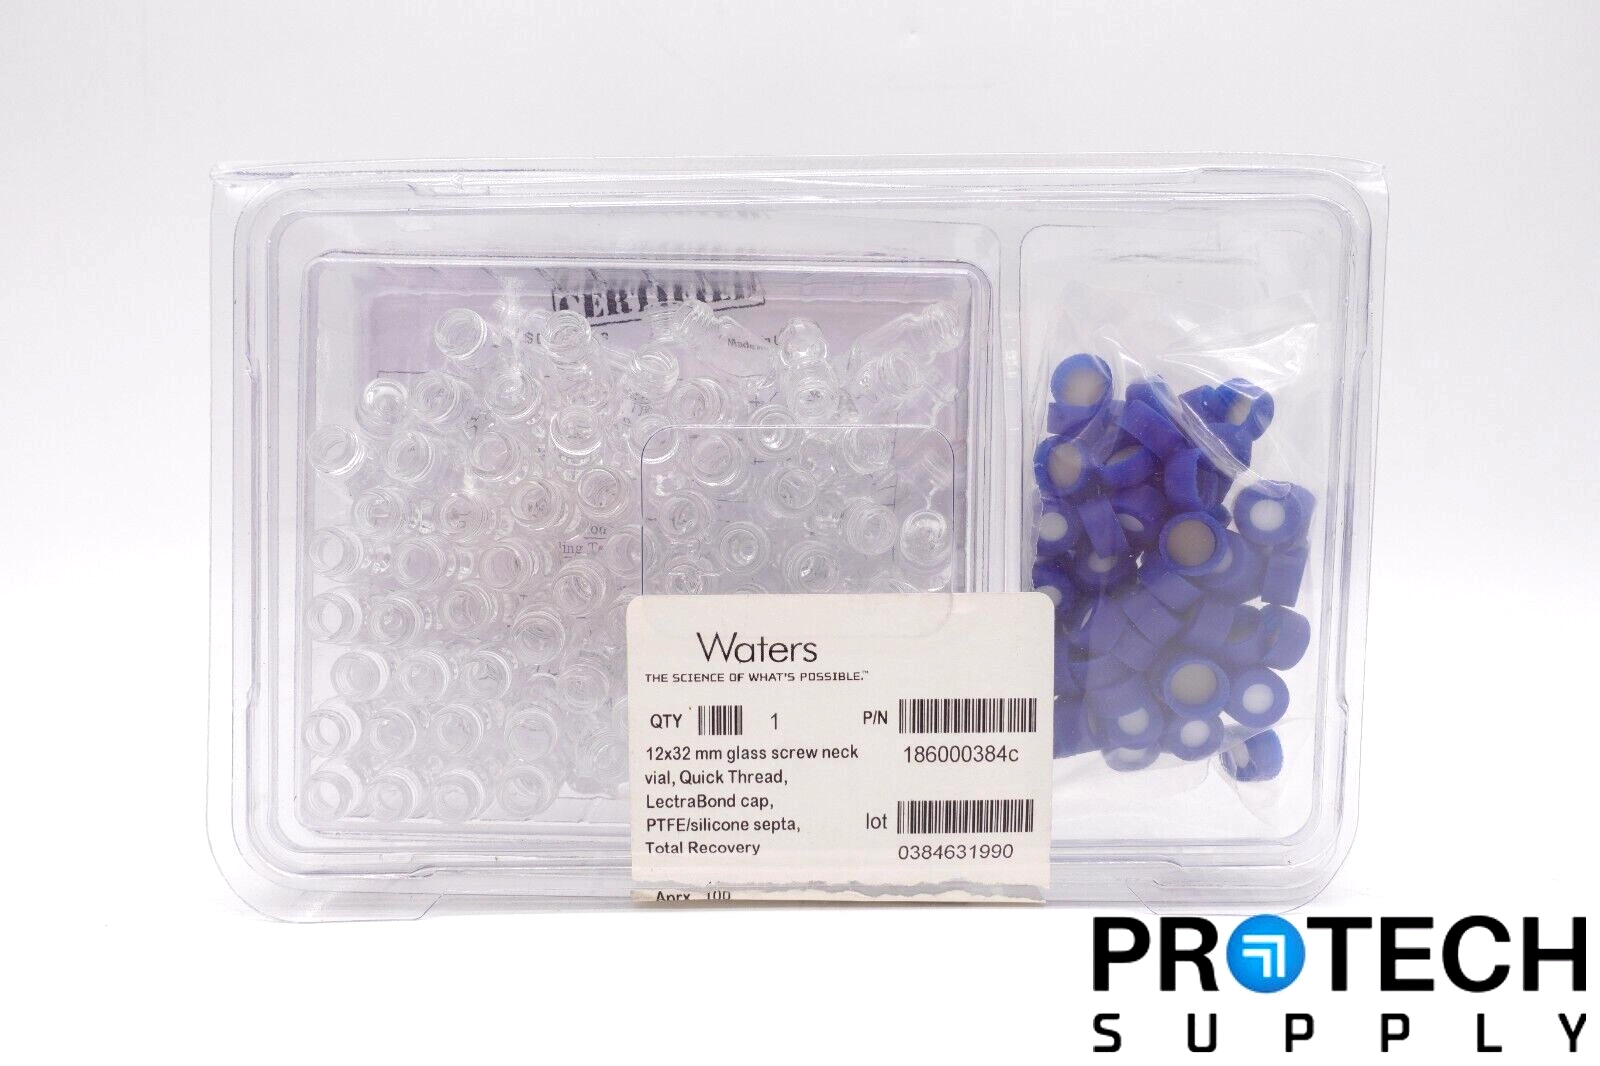 WATERS Clear Glass 12x32mm Screw Neck Vial (Aprx. 